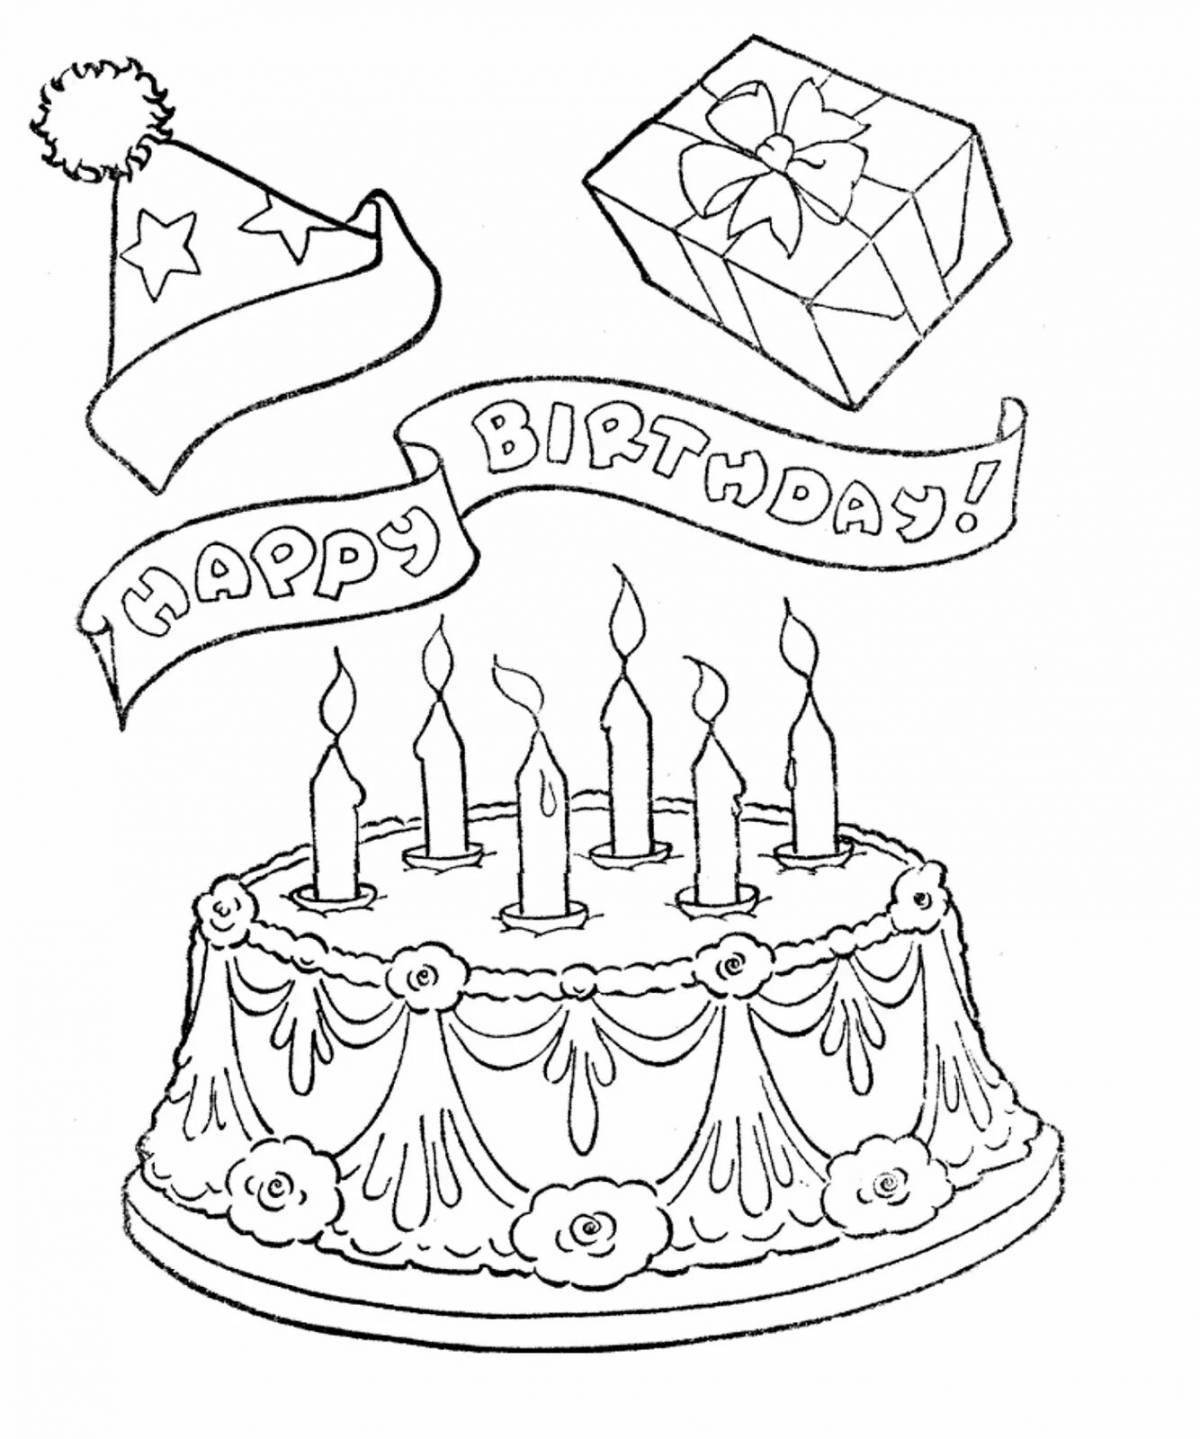 Adorable happy birthday sister coloring page